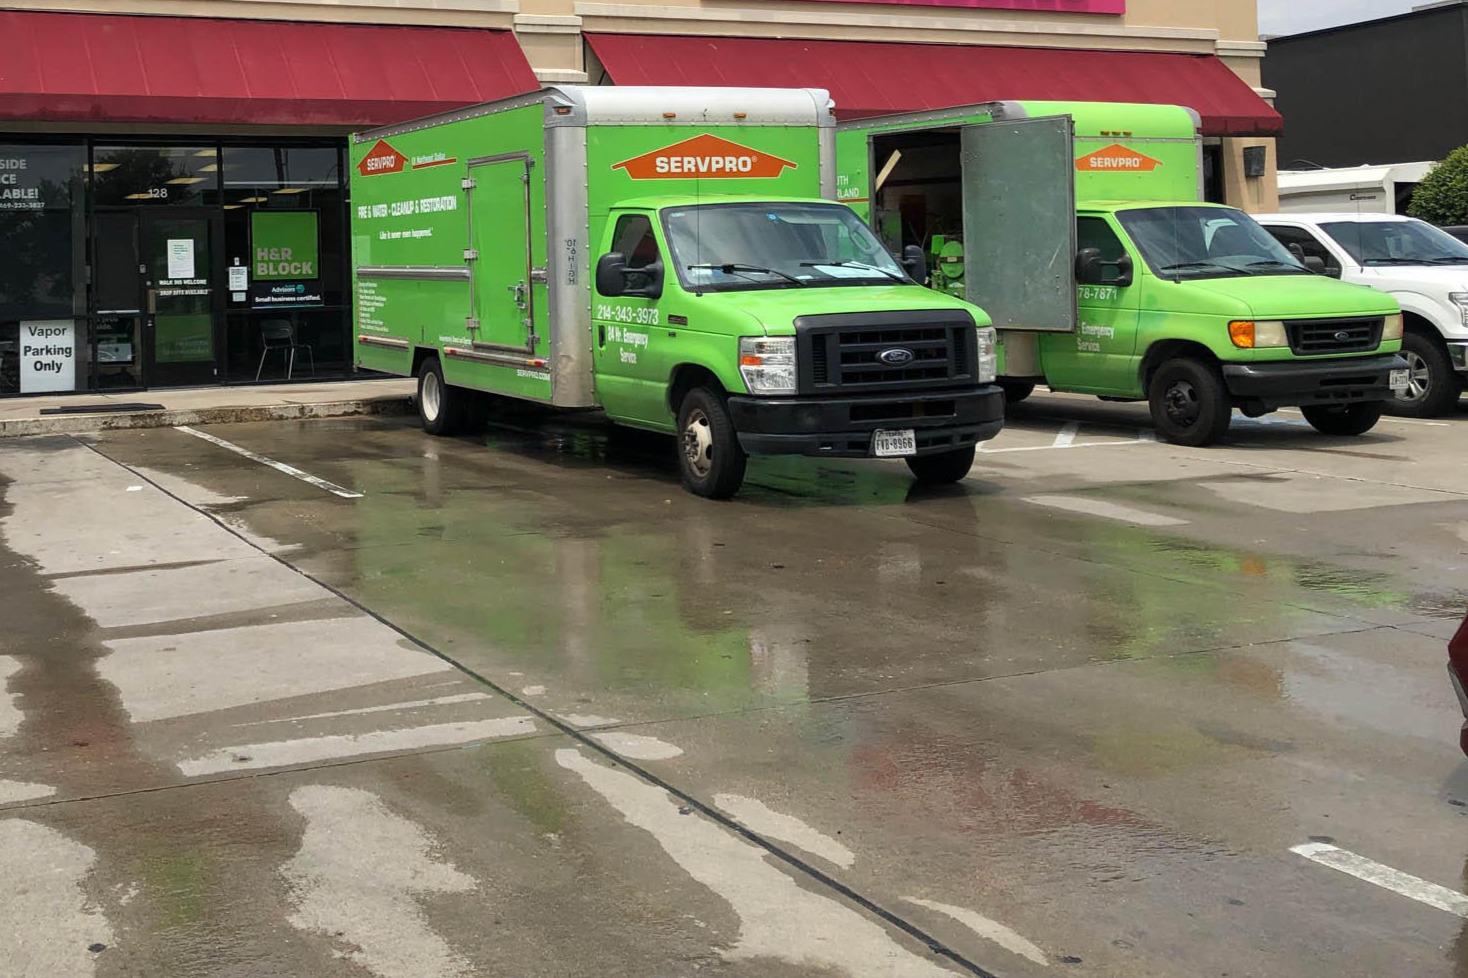 SERVPRO of Northeast Dallas specializes in fire, mold, and water damage restoration. Our team has considerable experience with all types of restoration projects and can help you restore your Windsor Park, TX property to its pre-damage state. Please give us a call!